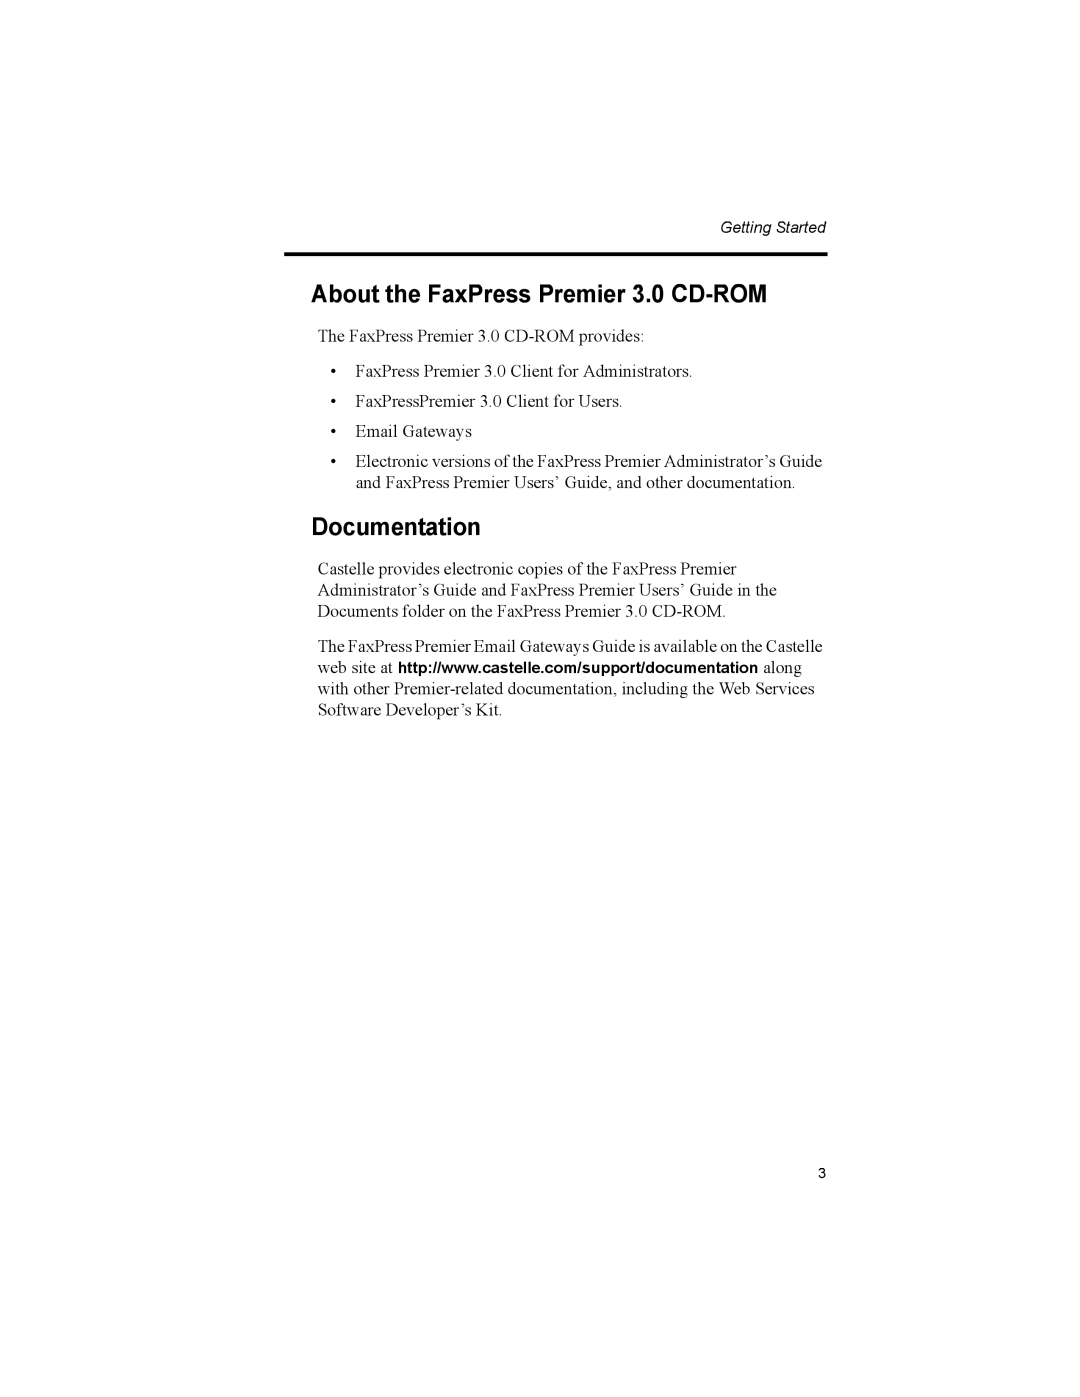 Castelle 61-1260-001A manual About the FaxPress Premier 3.0 CD-ROM, Documentation 